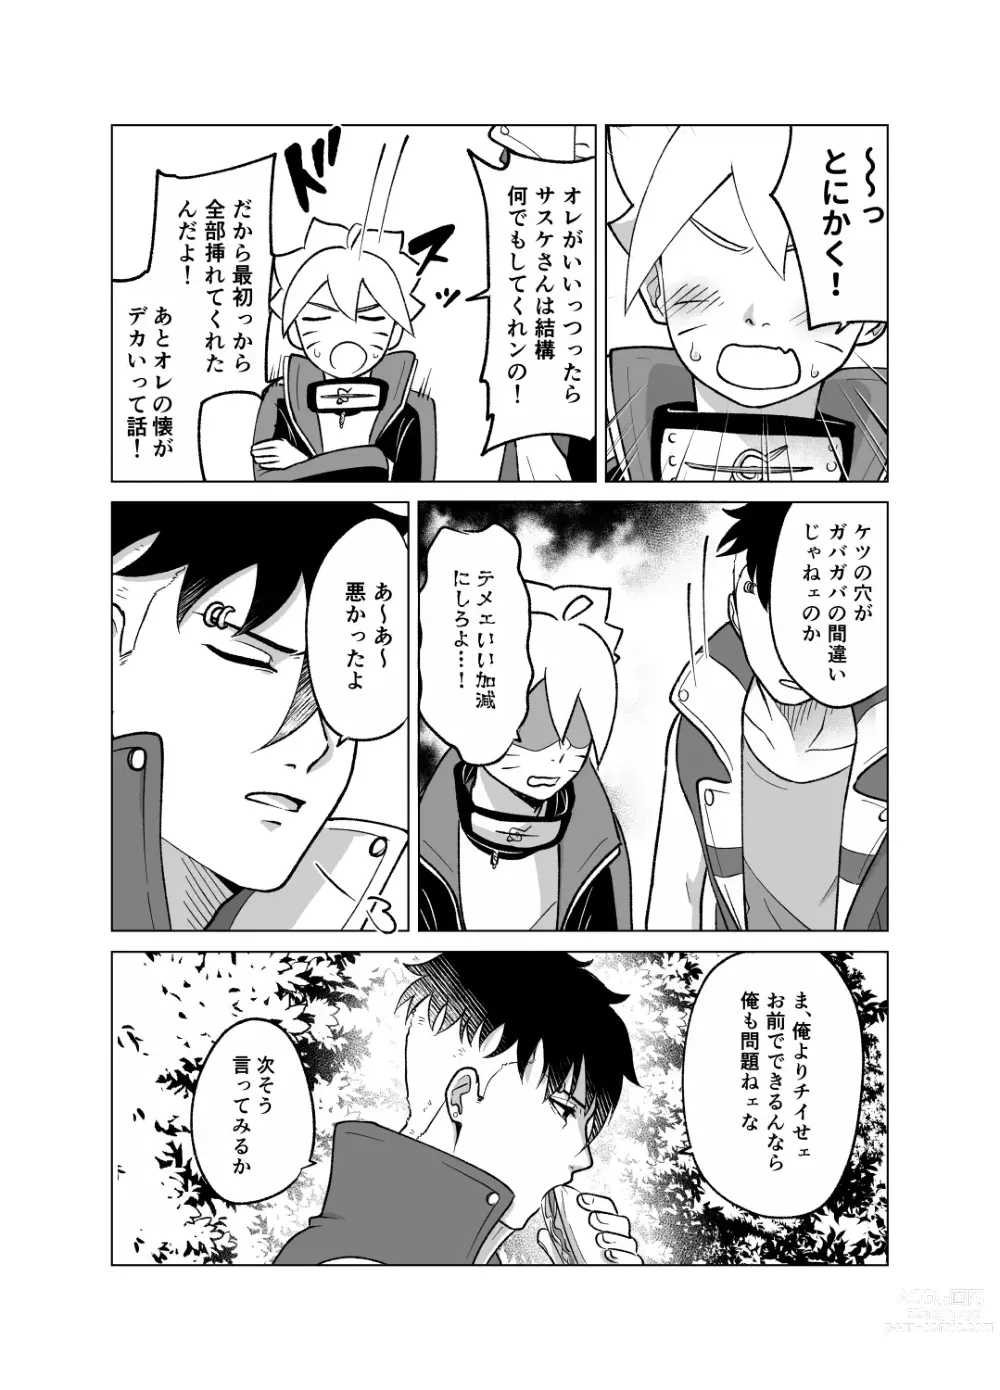 Page 6 of doujinshi Total Insert